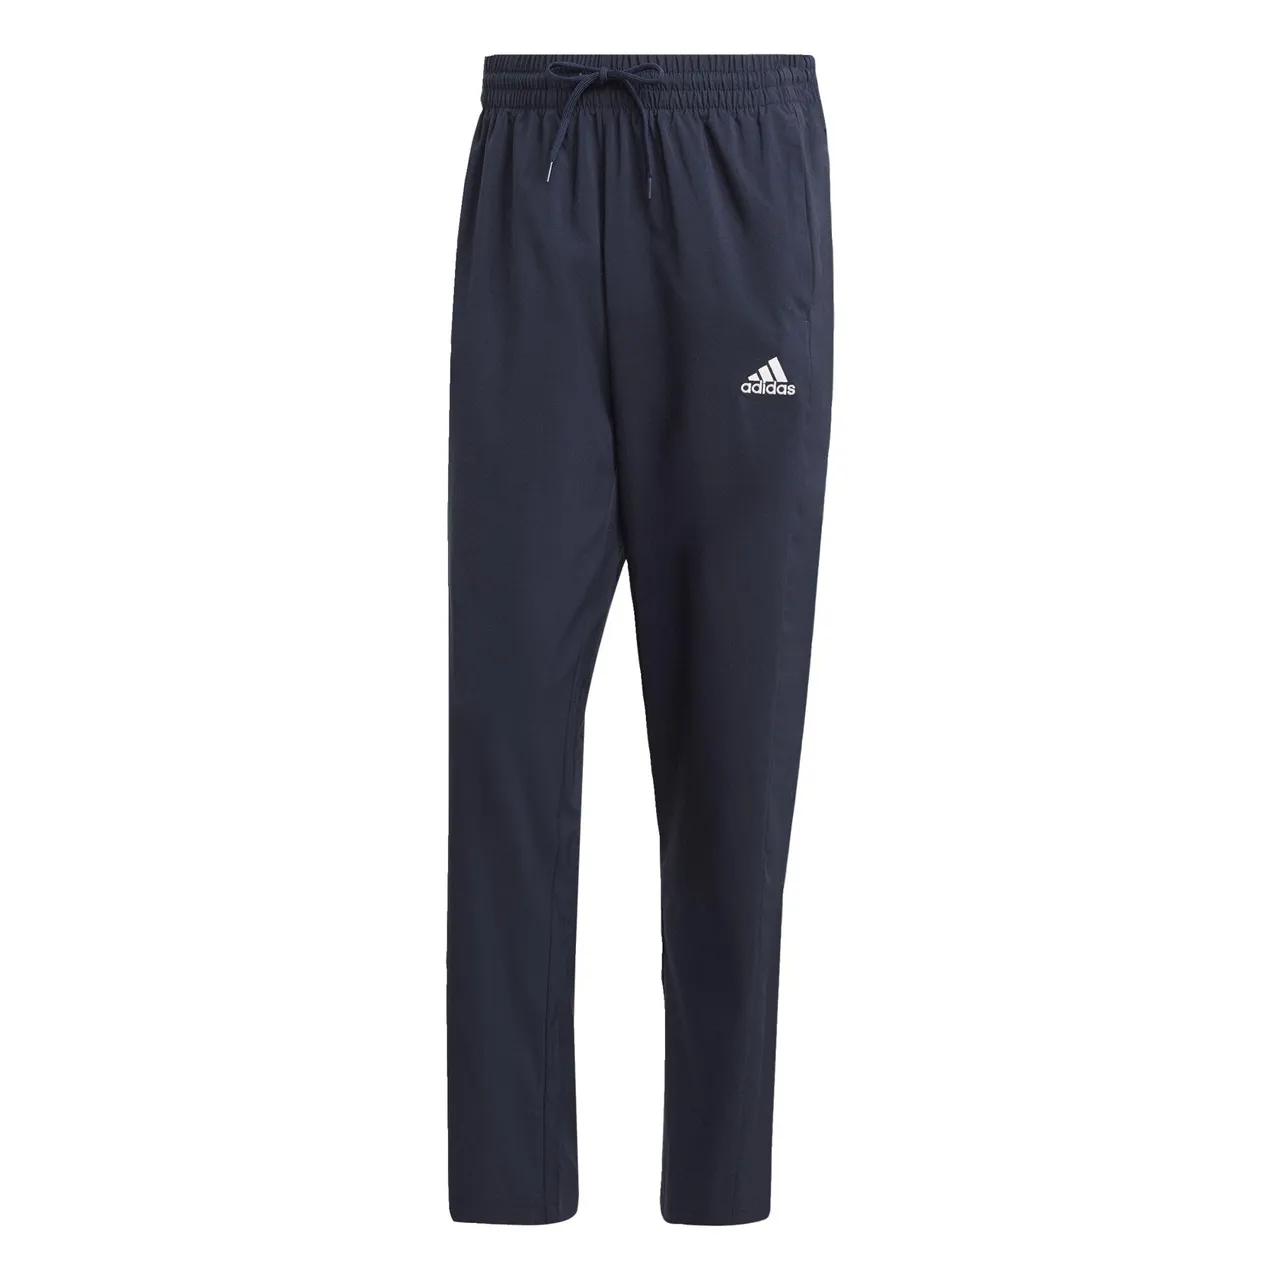 Adidas IC9416 M STANFRD O PT Shorts Men's Legend Ink S